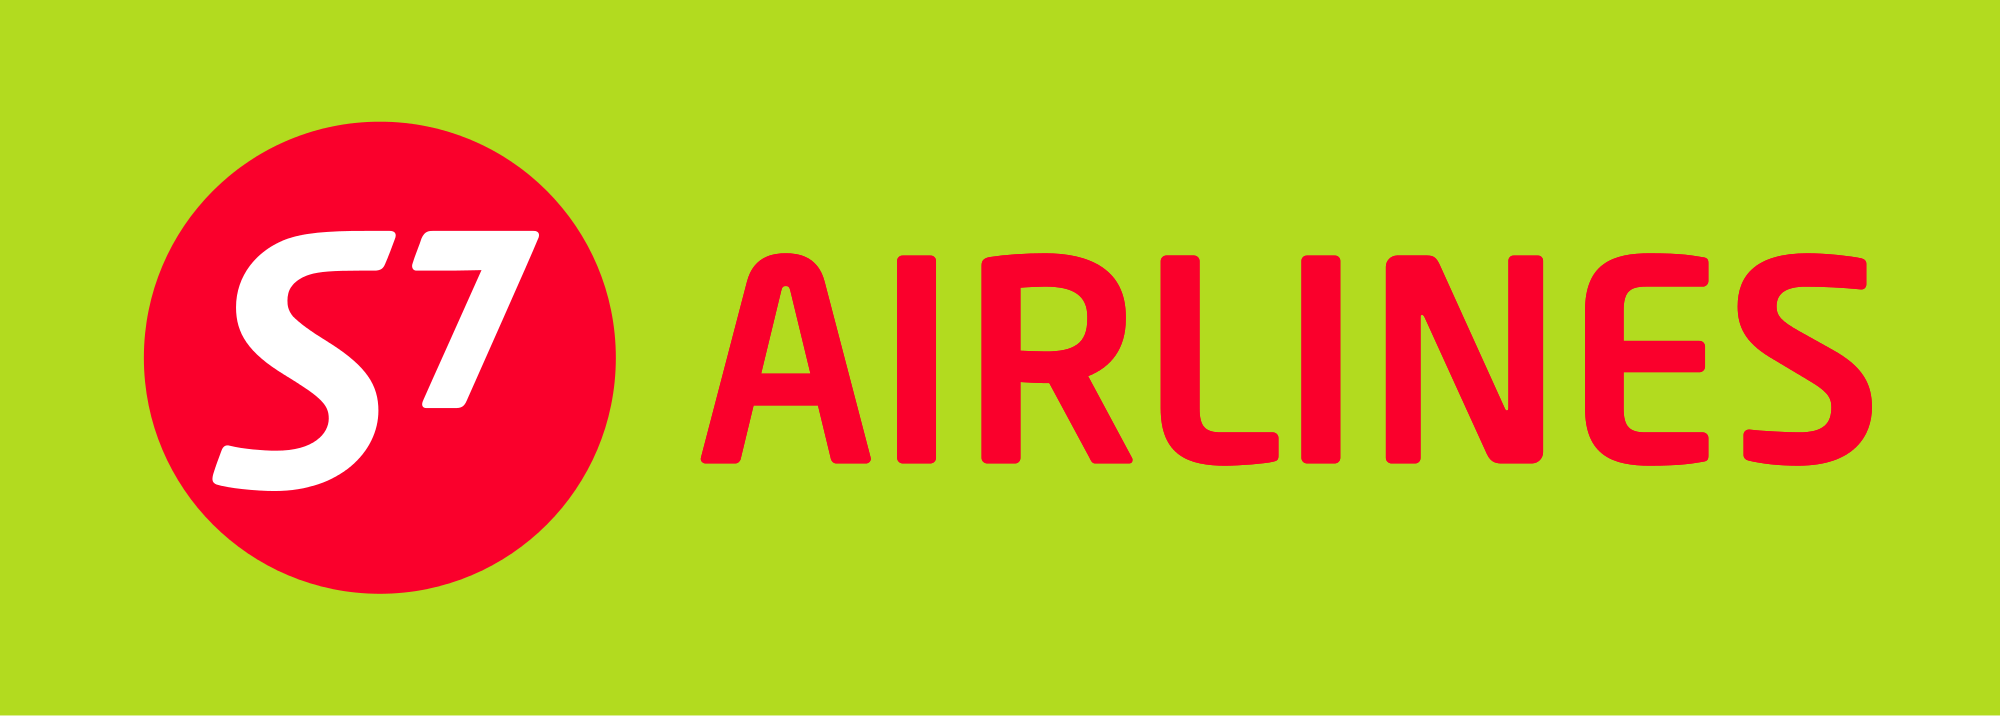 A Green and Red Airline Logo - File:S7 Airlines Green Logo.svg - Wikimedia Commons